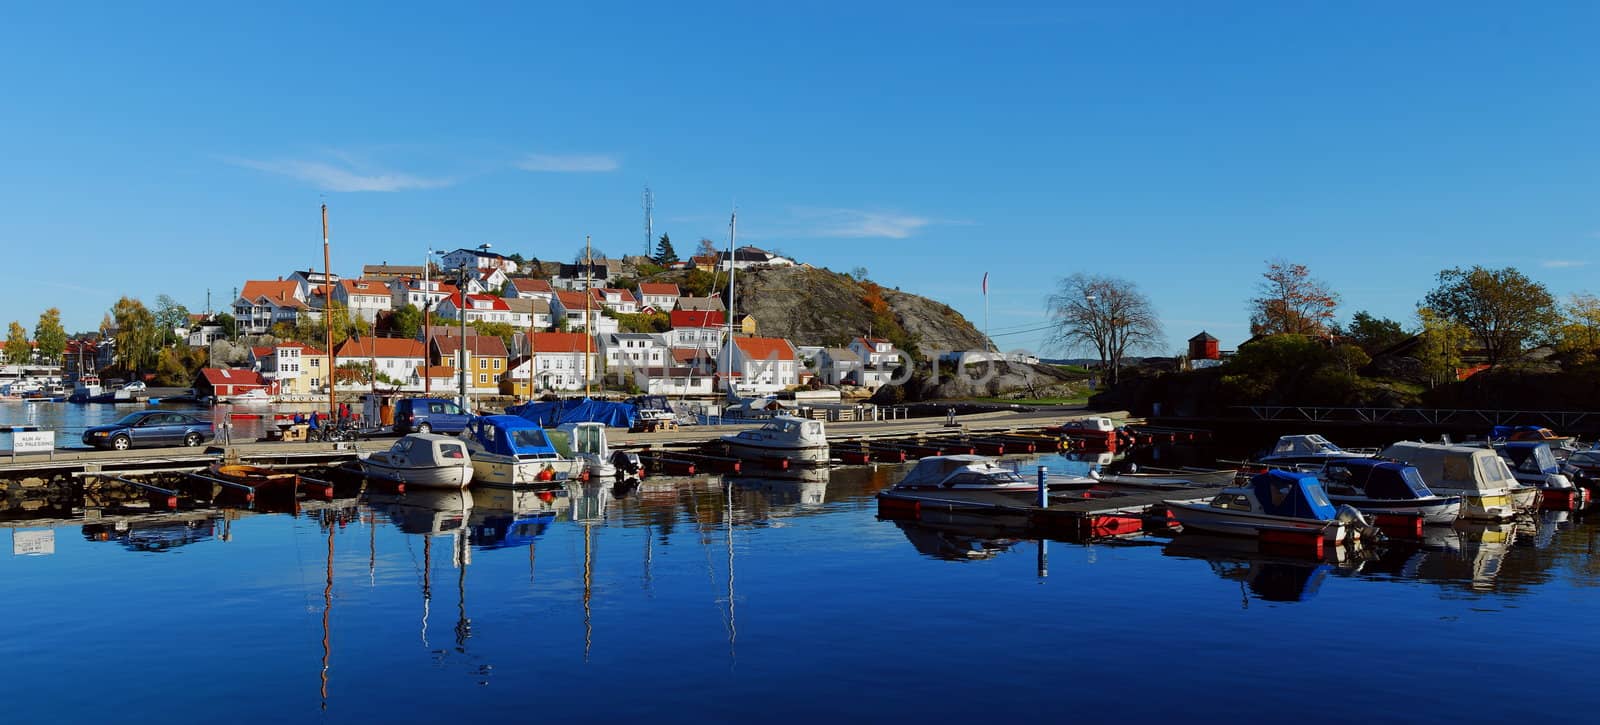 Marina. Rocky island with houses in Kragero, Norway. by teus